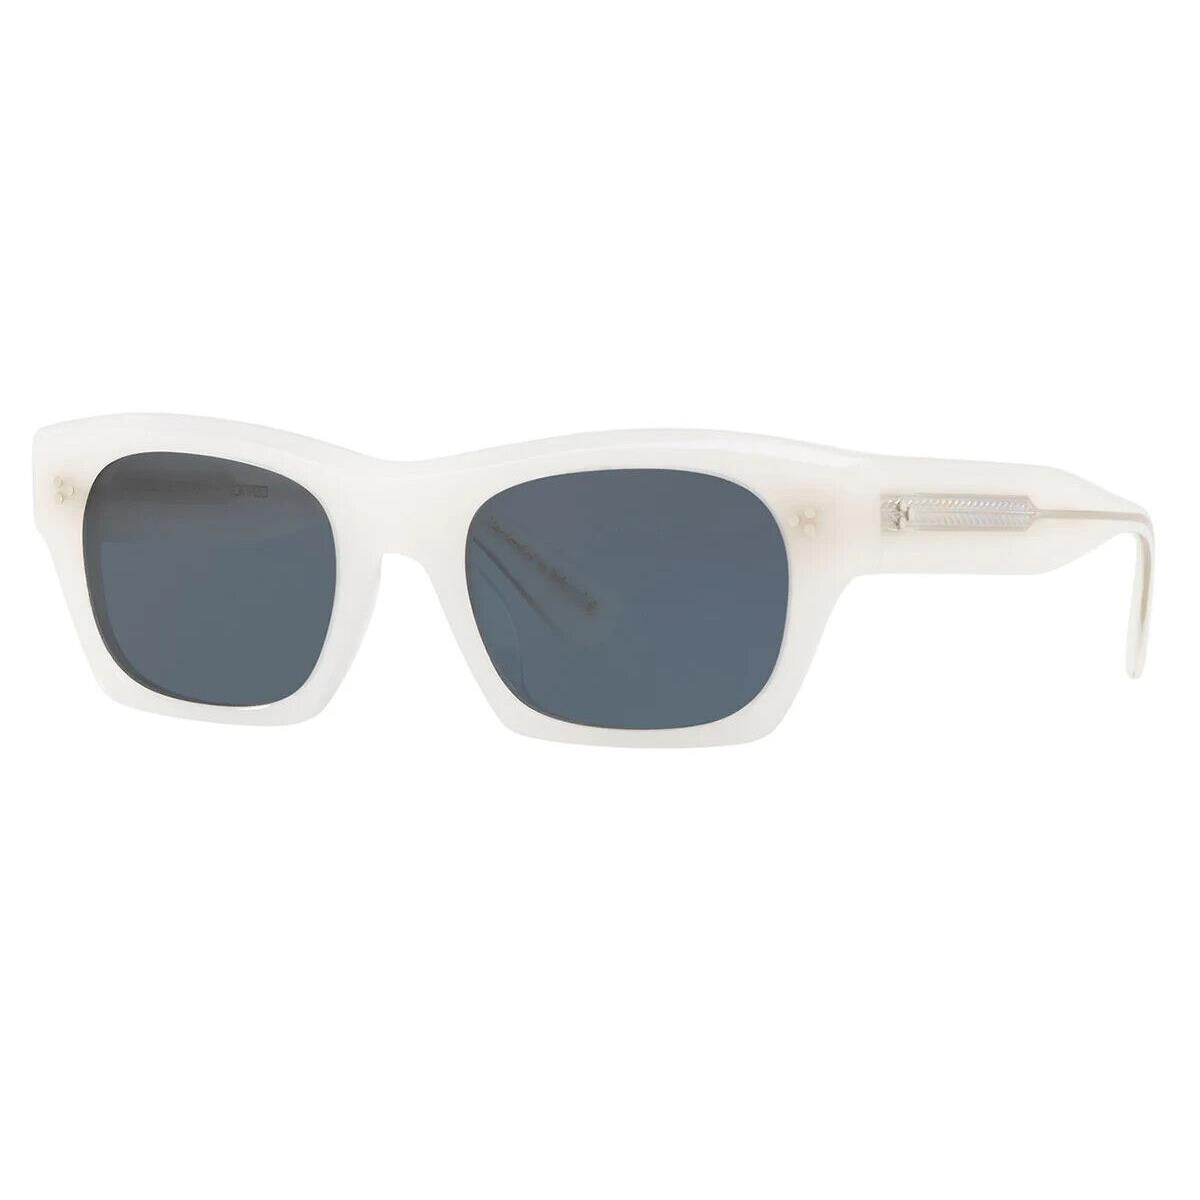 Oliver Peoples OV5376SU 1606R5 White Pearl Blue Bold Sunglasses 51mm - Frame: White, Lens: Gold